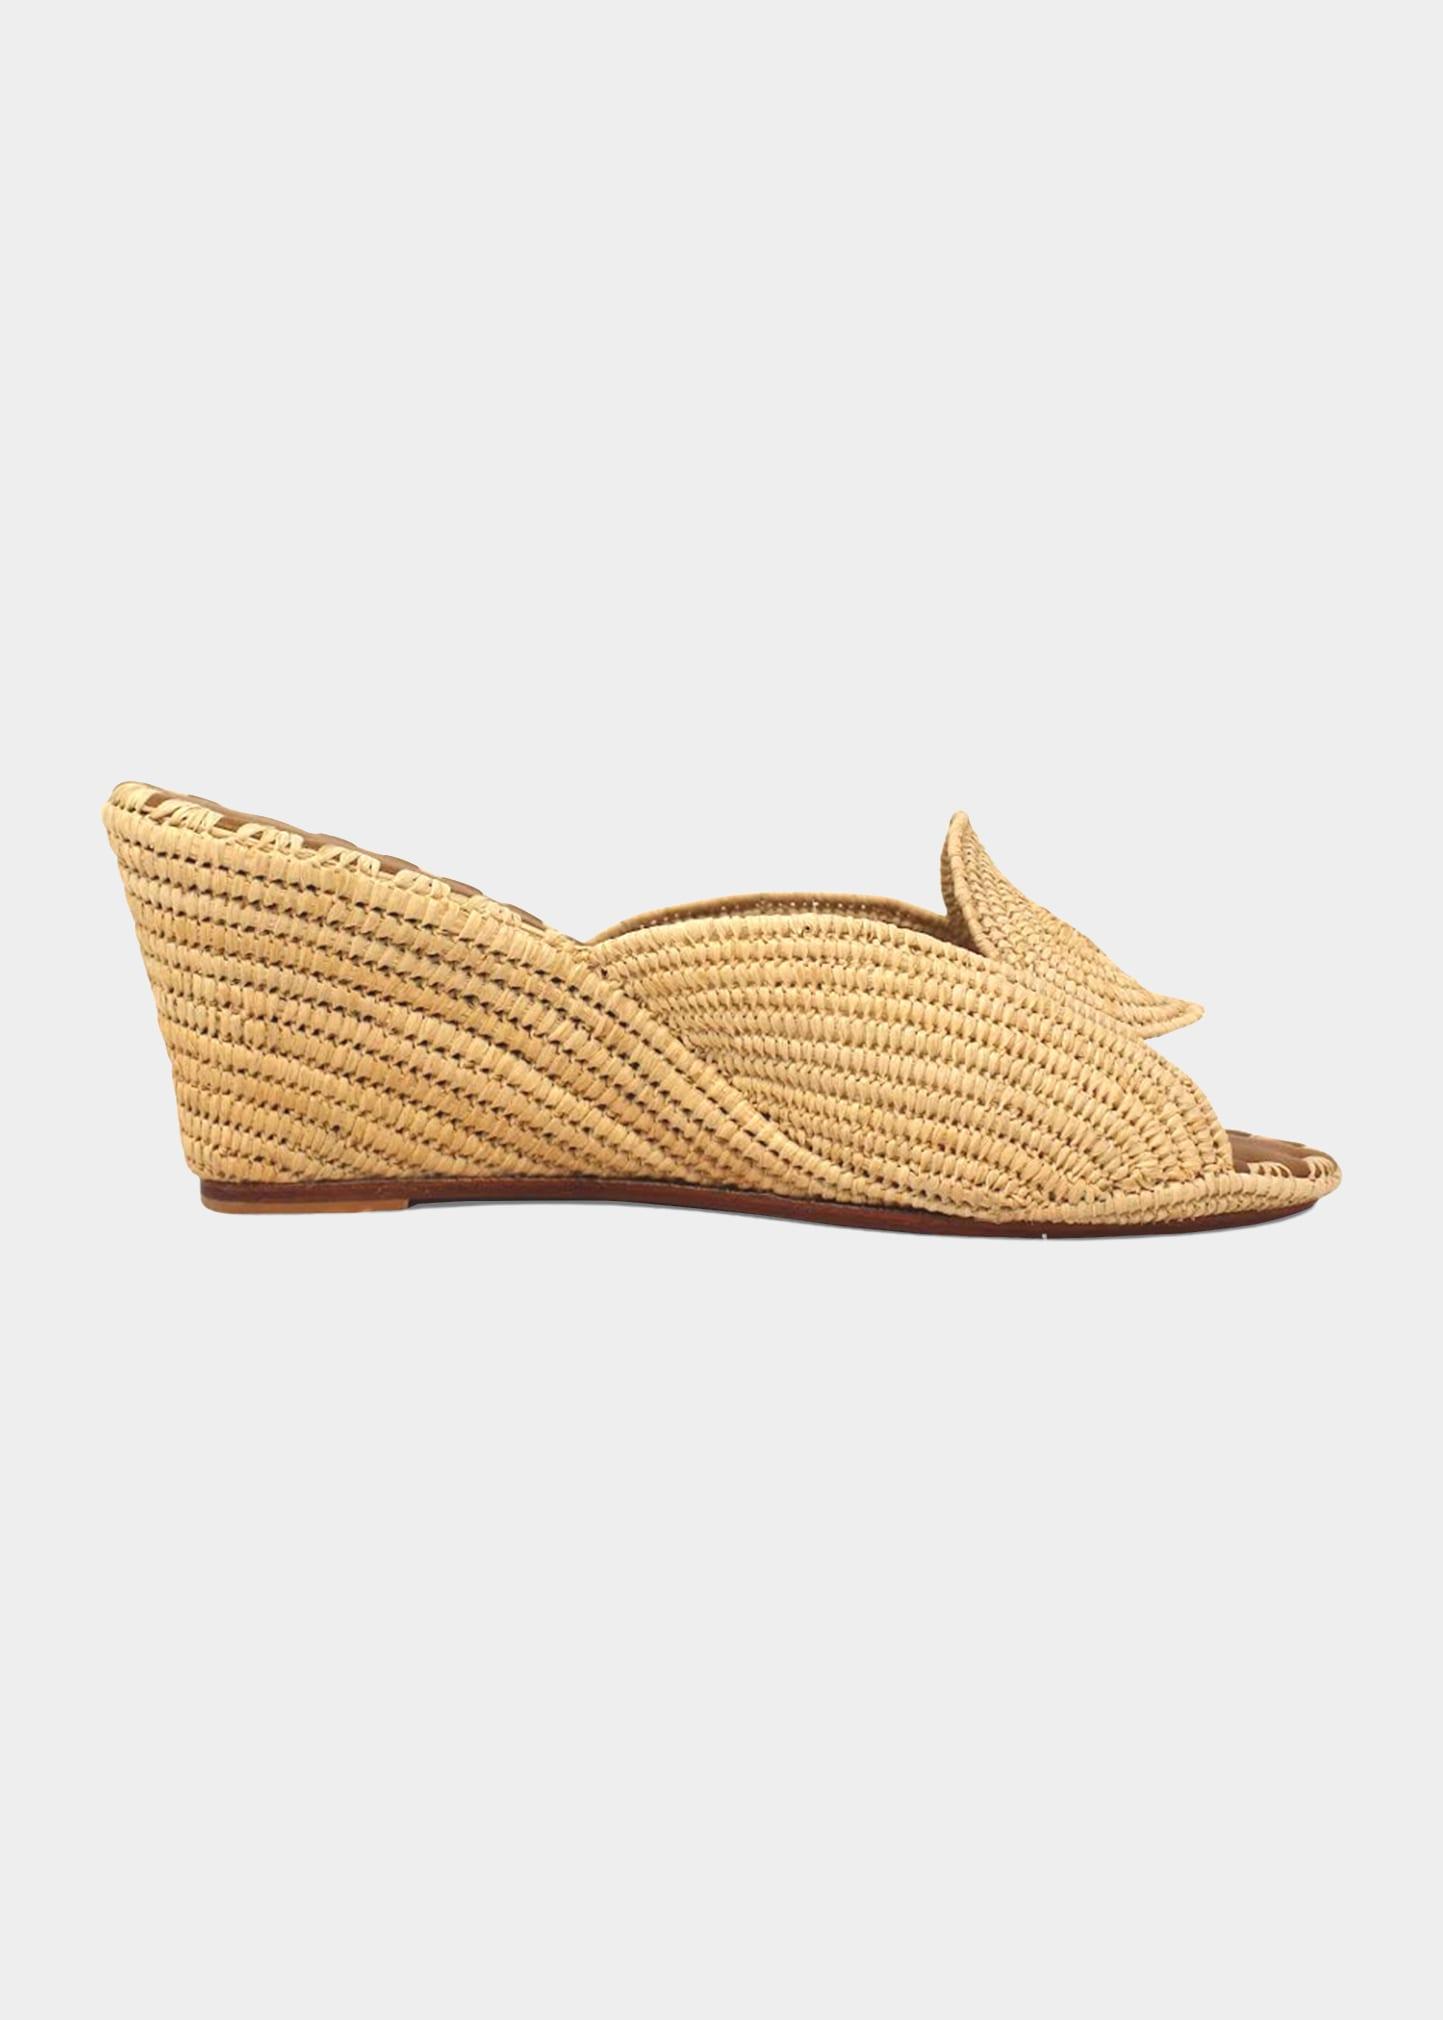 Carrie Forbes Etre Raffia Wedge Sandals in White | Lyst